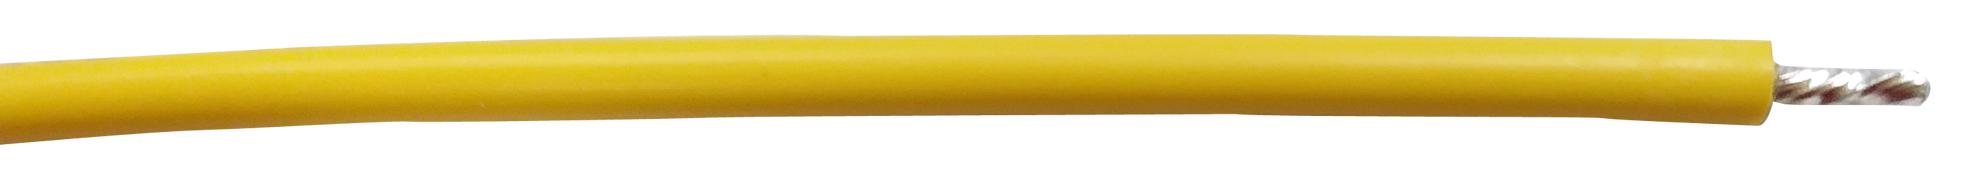 PP002439 HOOK-UP WIRE, 30AWG, YELLOW, 305M, 30V PRO POWER